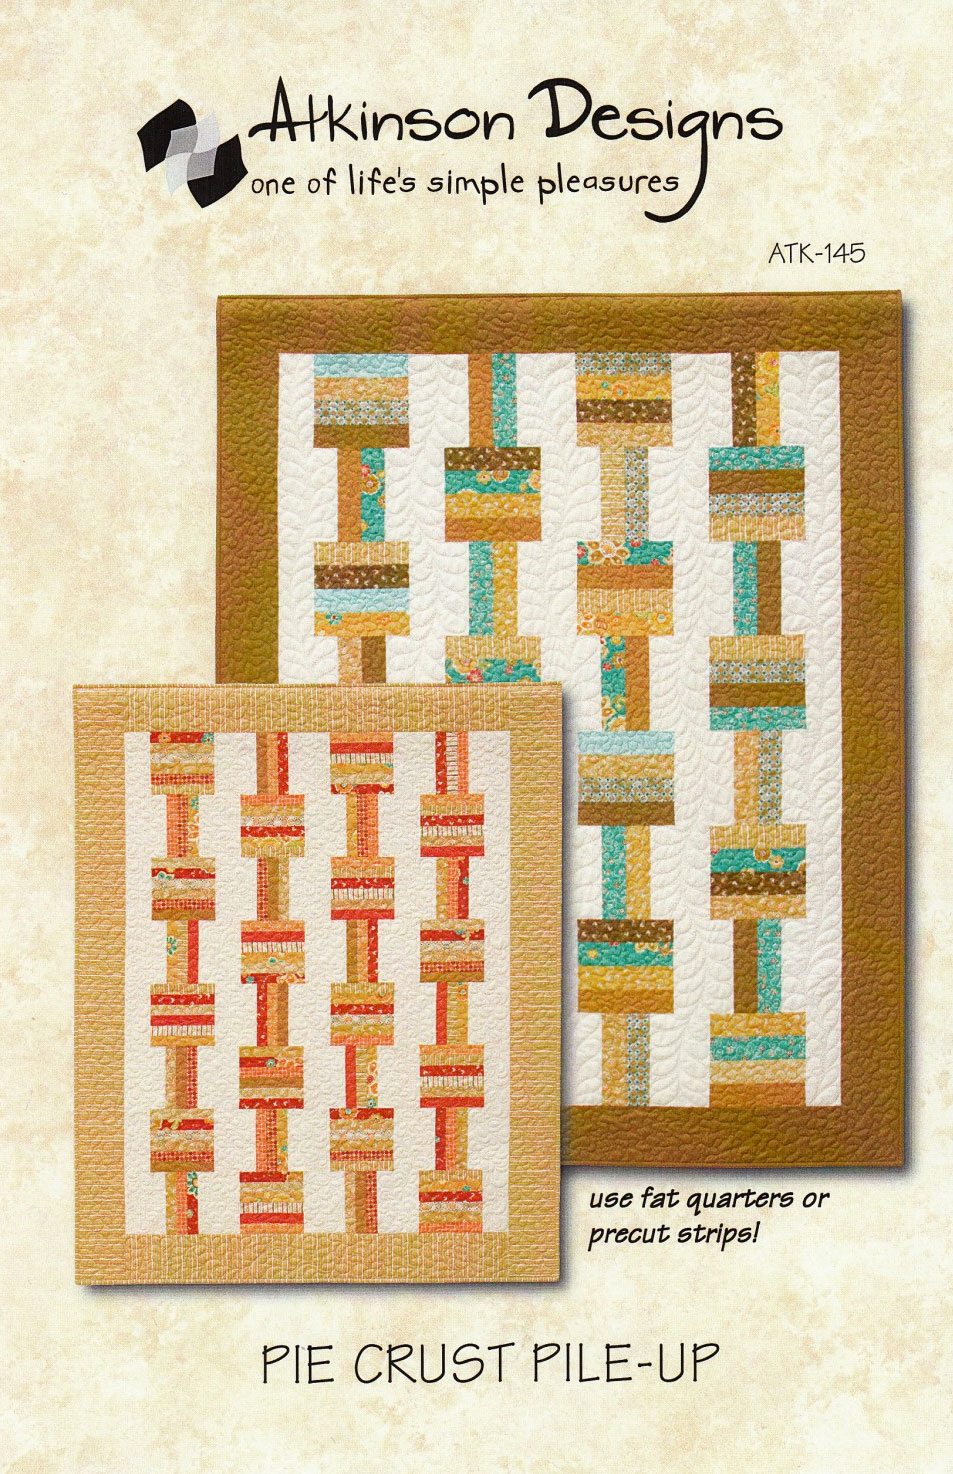 Pie-Crust-Pile-Up-quilt-sewing-pattern-Atkinson-Designs-front